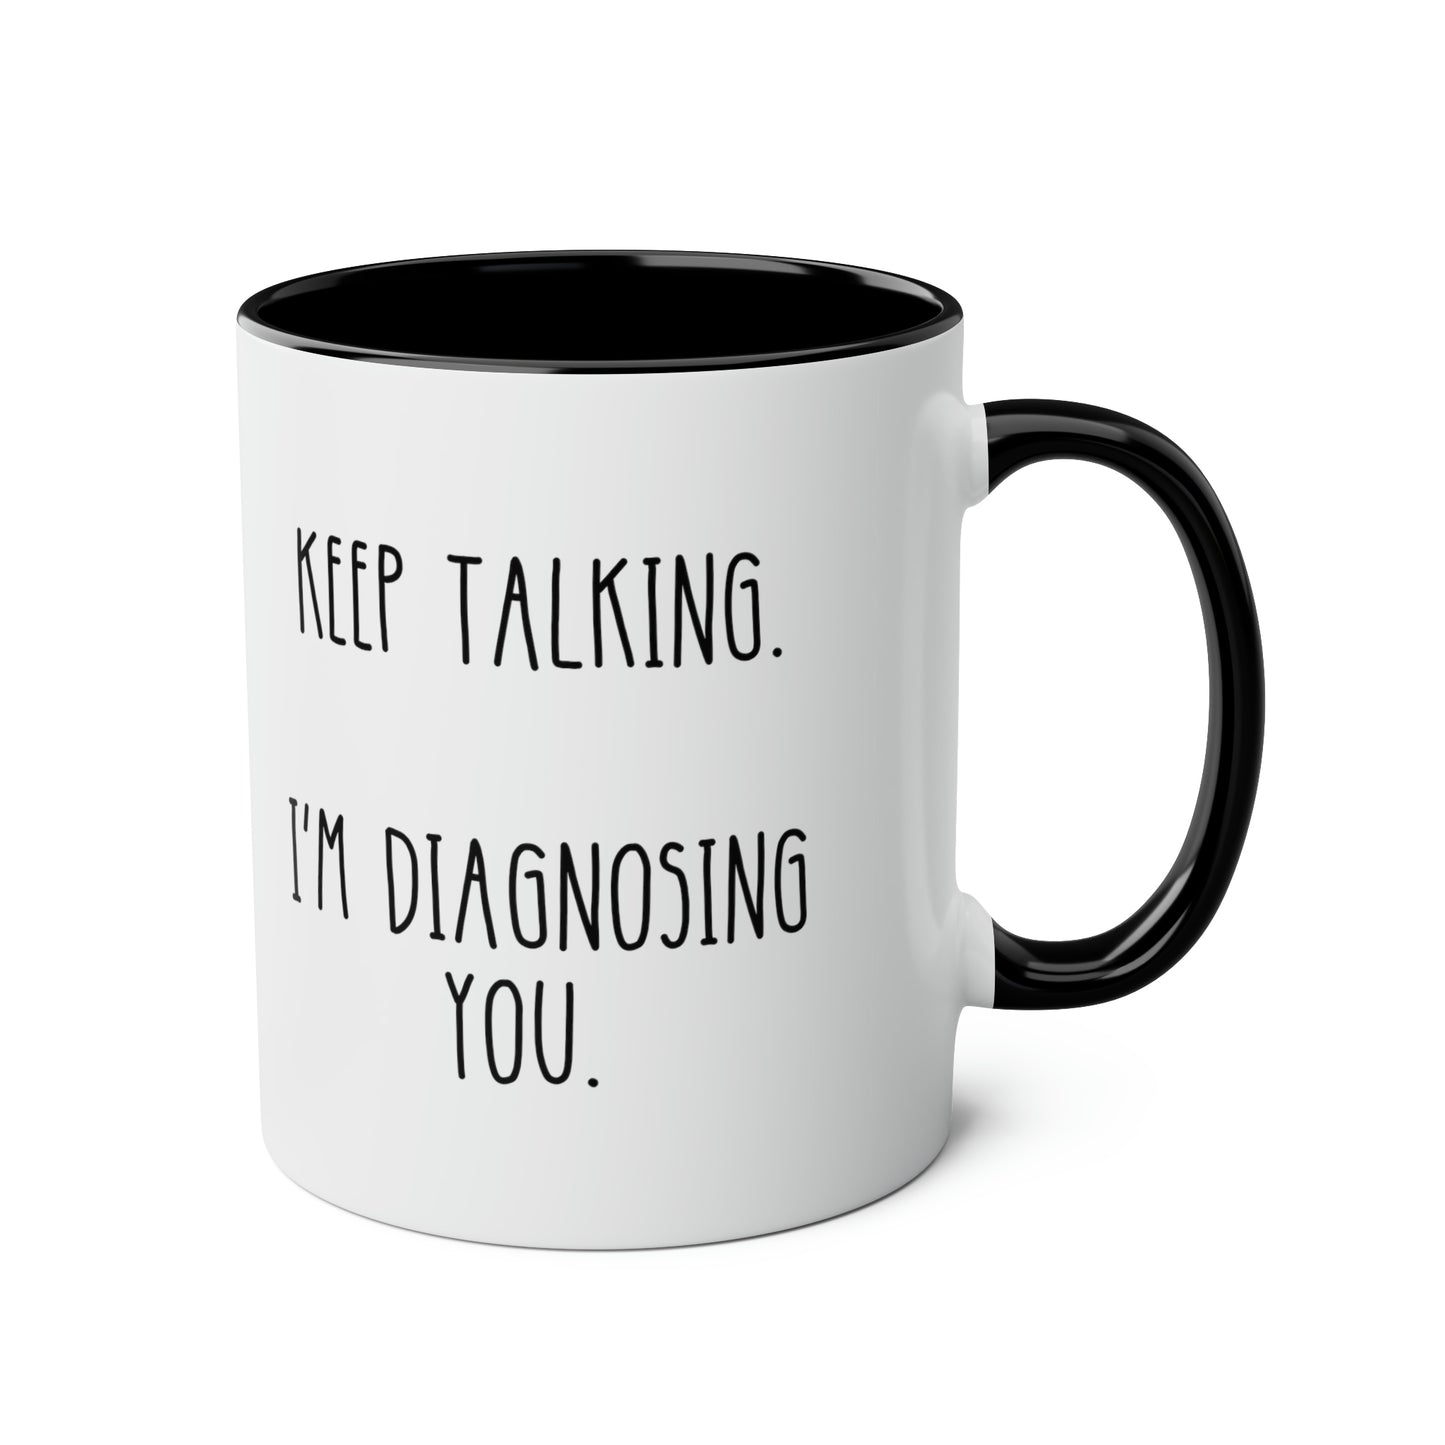 Keep Talking Im Diagnosing You 11oz white with black accent Funny large Coffee Mug Psychology Gift for Psychiatrist Therapist Counselor waveywares wavey wares wavywares wavy wares